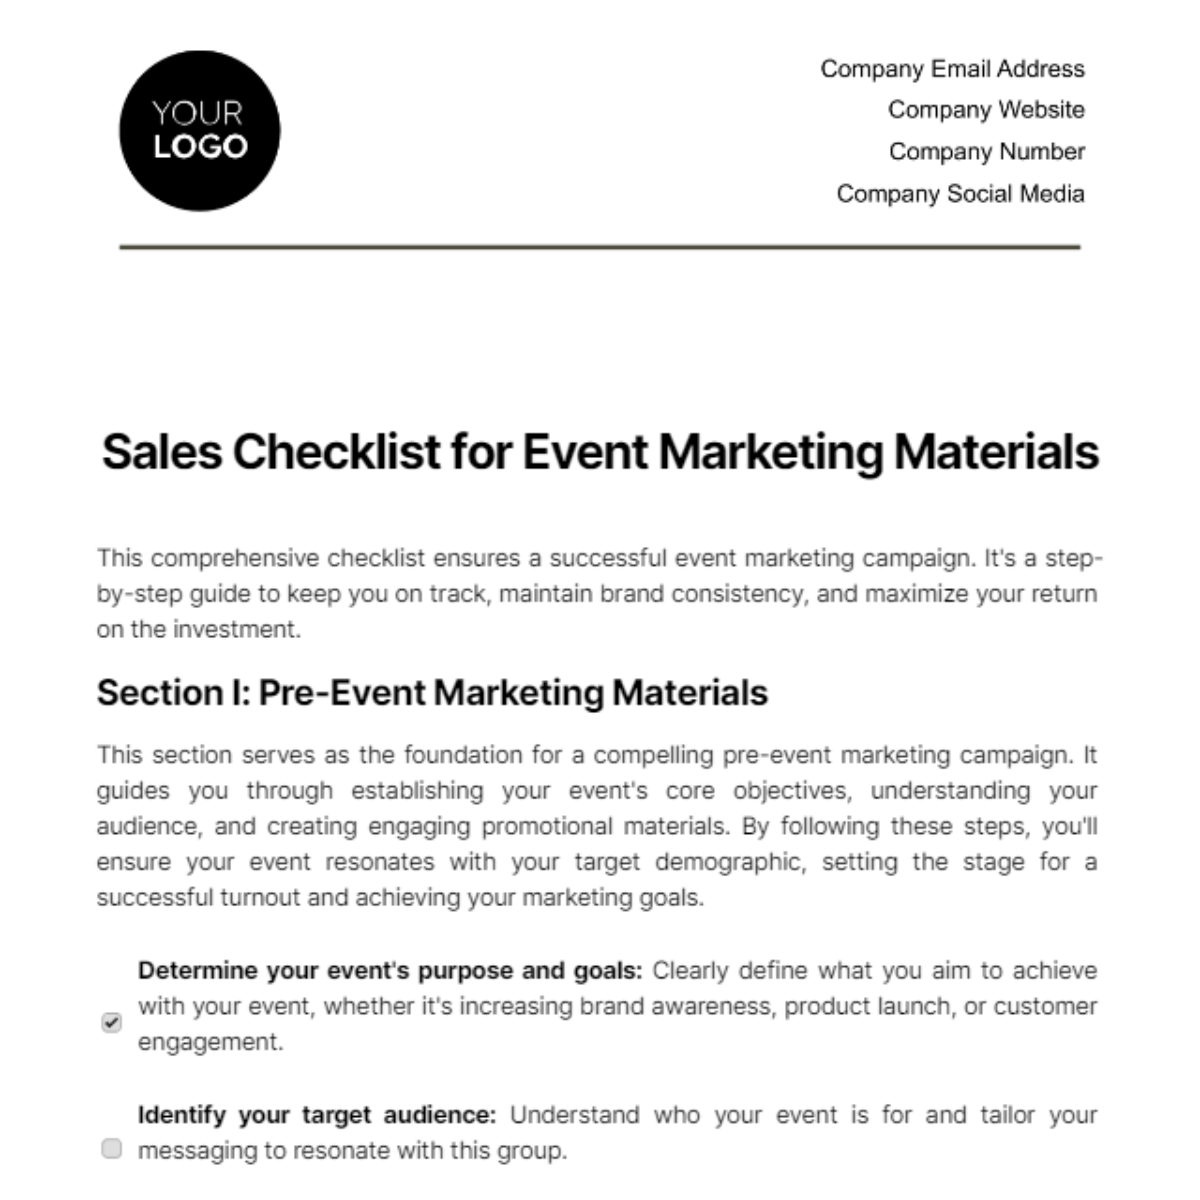 Free Sales Checklist for Event Marketing Materials Template